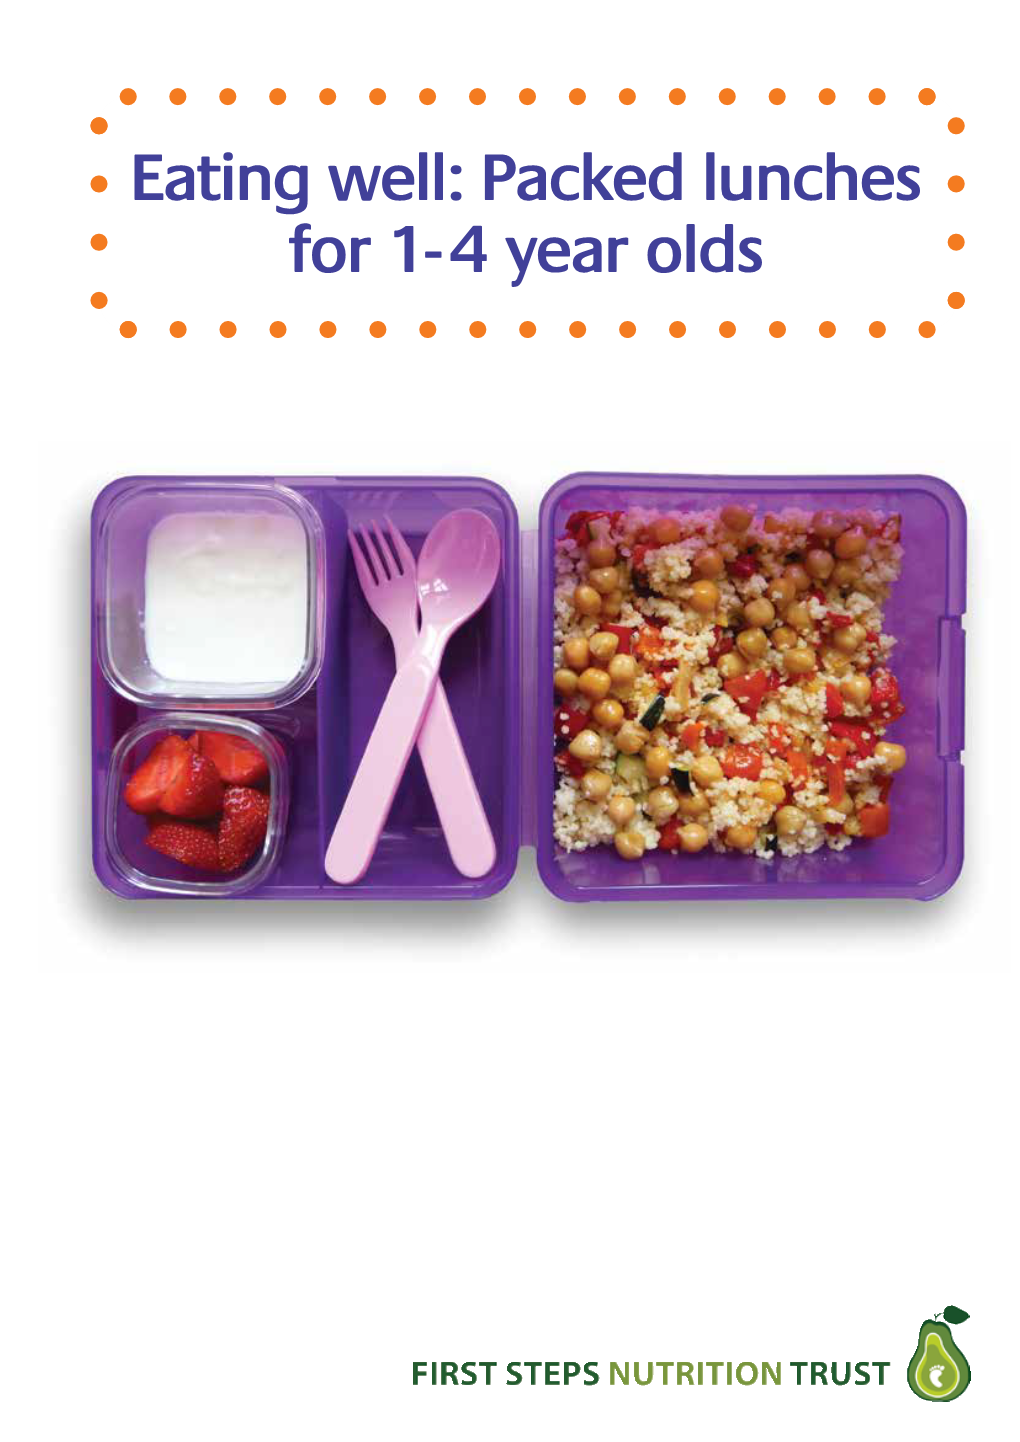 Eating Well: Packed Lunches for 1-4 Year Olds Eating Well: Packed Lunches for 1-4 Year Olds